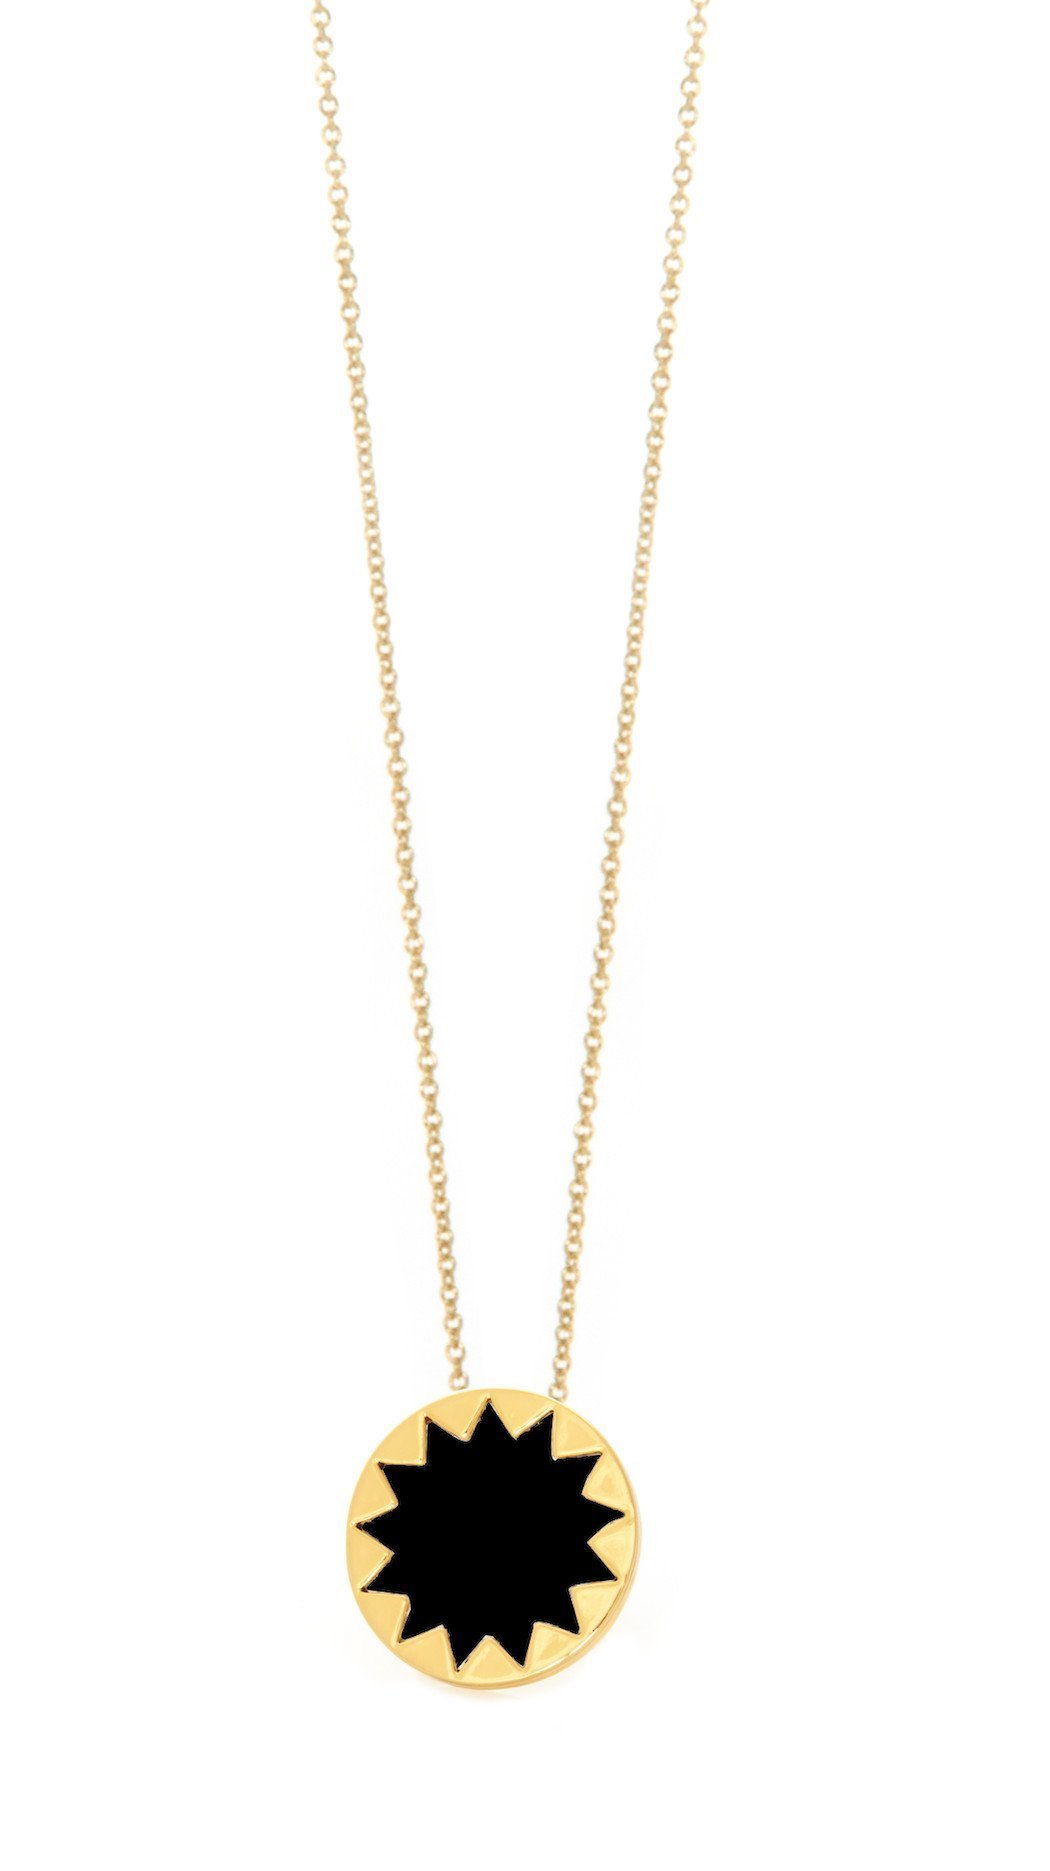 Girl wearing a necklace rental from House of Harlow 1960 called Mini Sunburst Pendant Necklace